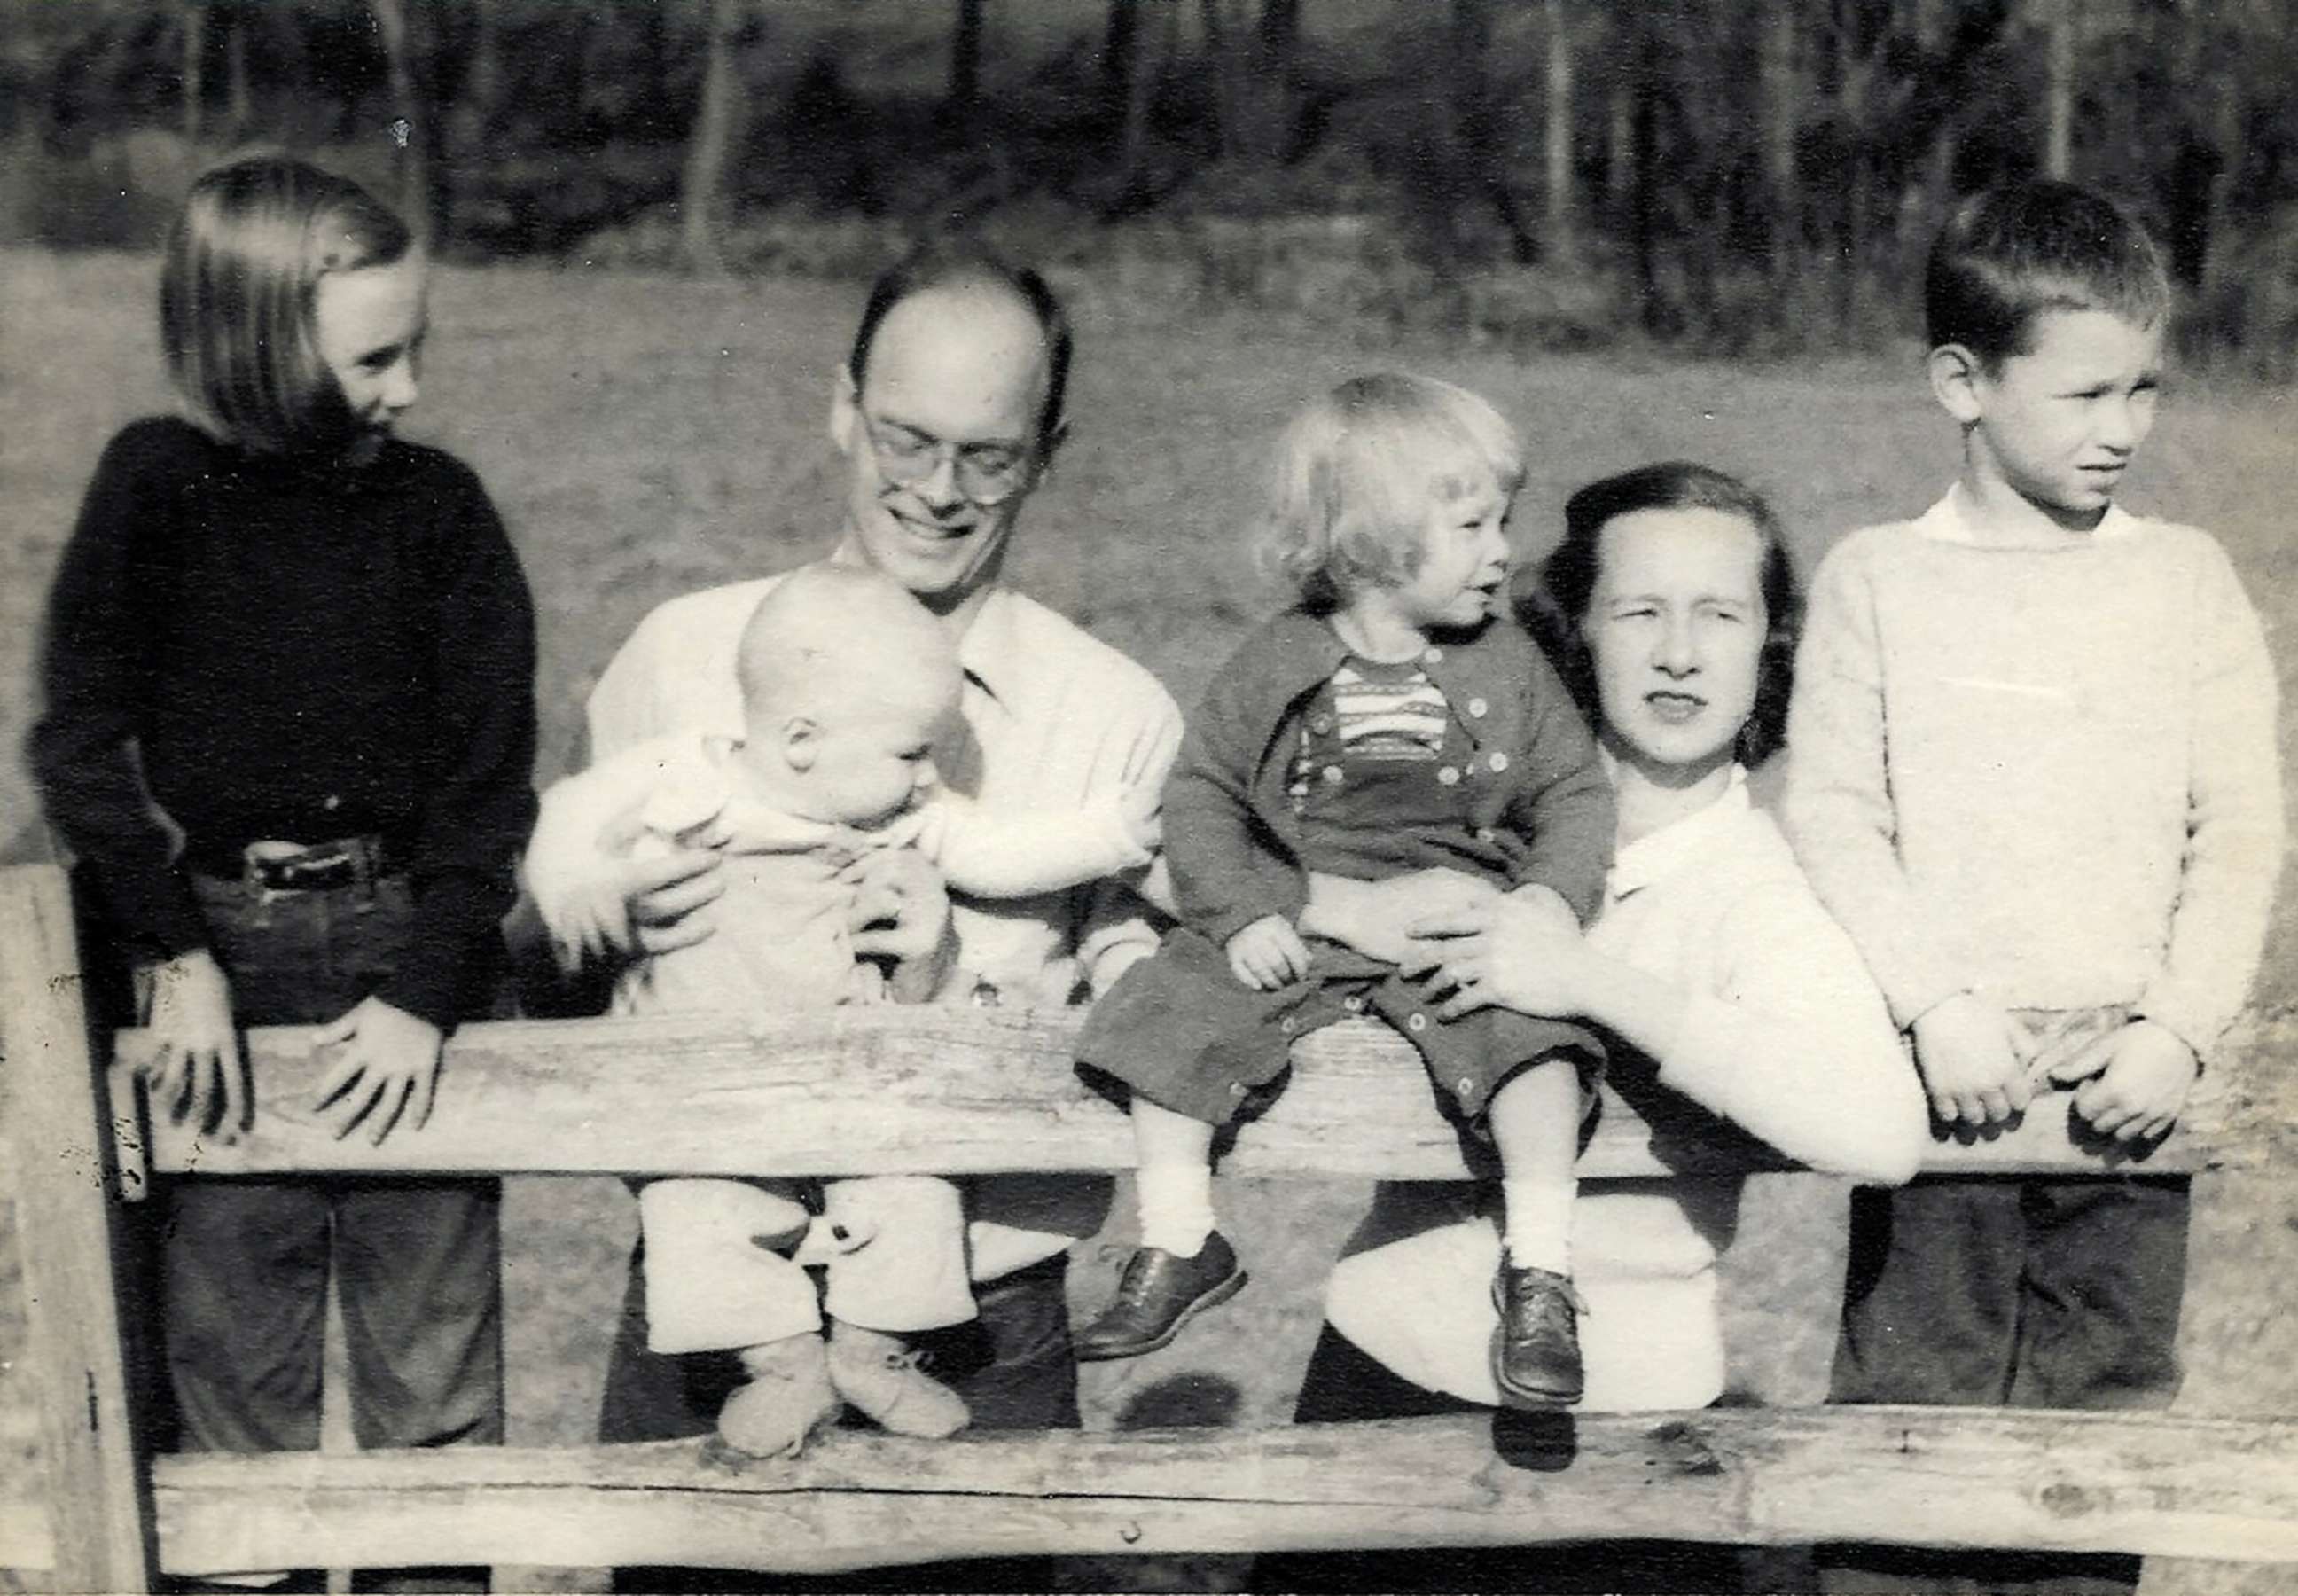 PHOTO: Former Colorado Gov. John Hickenlooper with his father, John Wright Hickenlooper, and family in an undated photo.